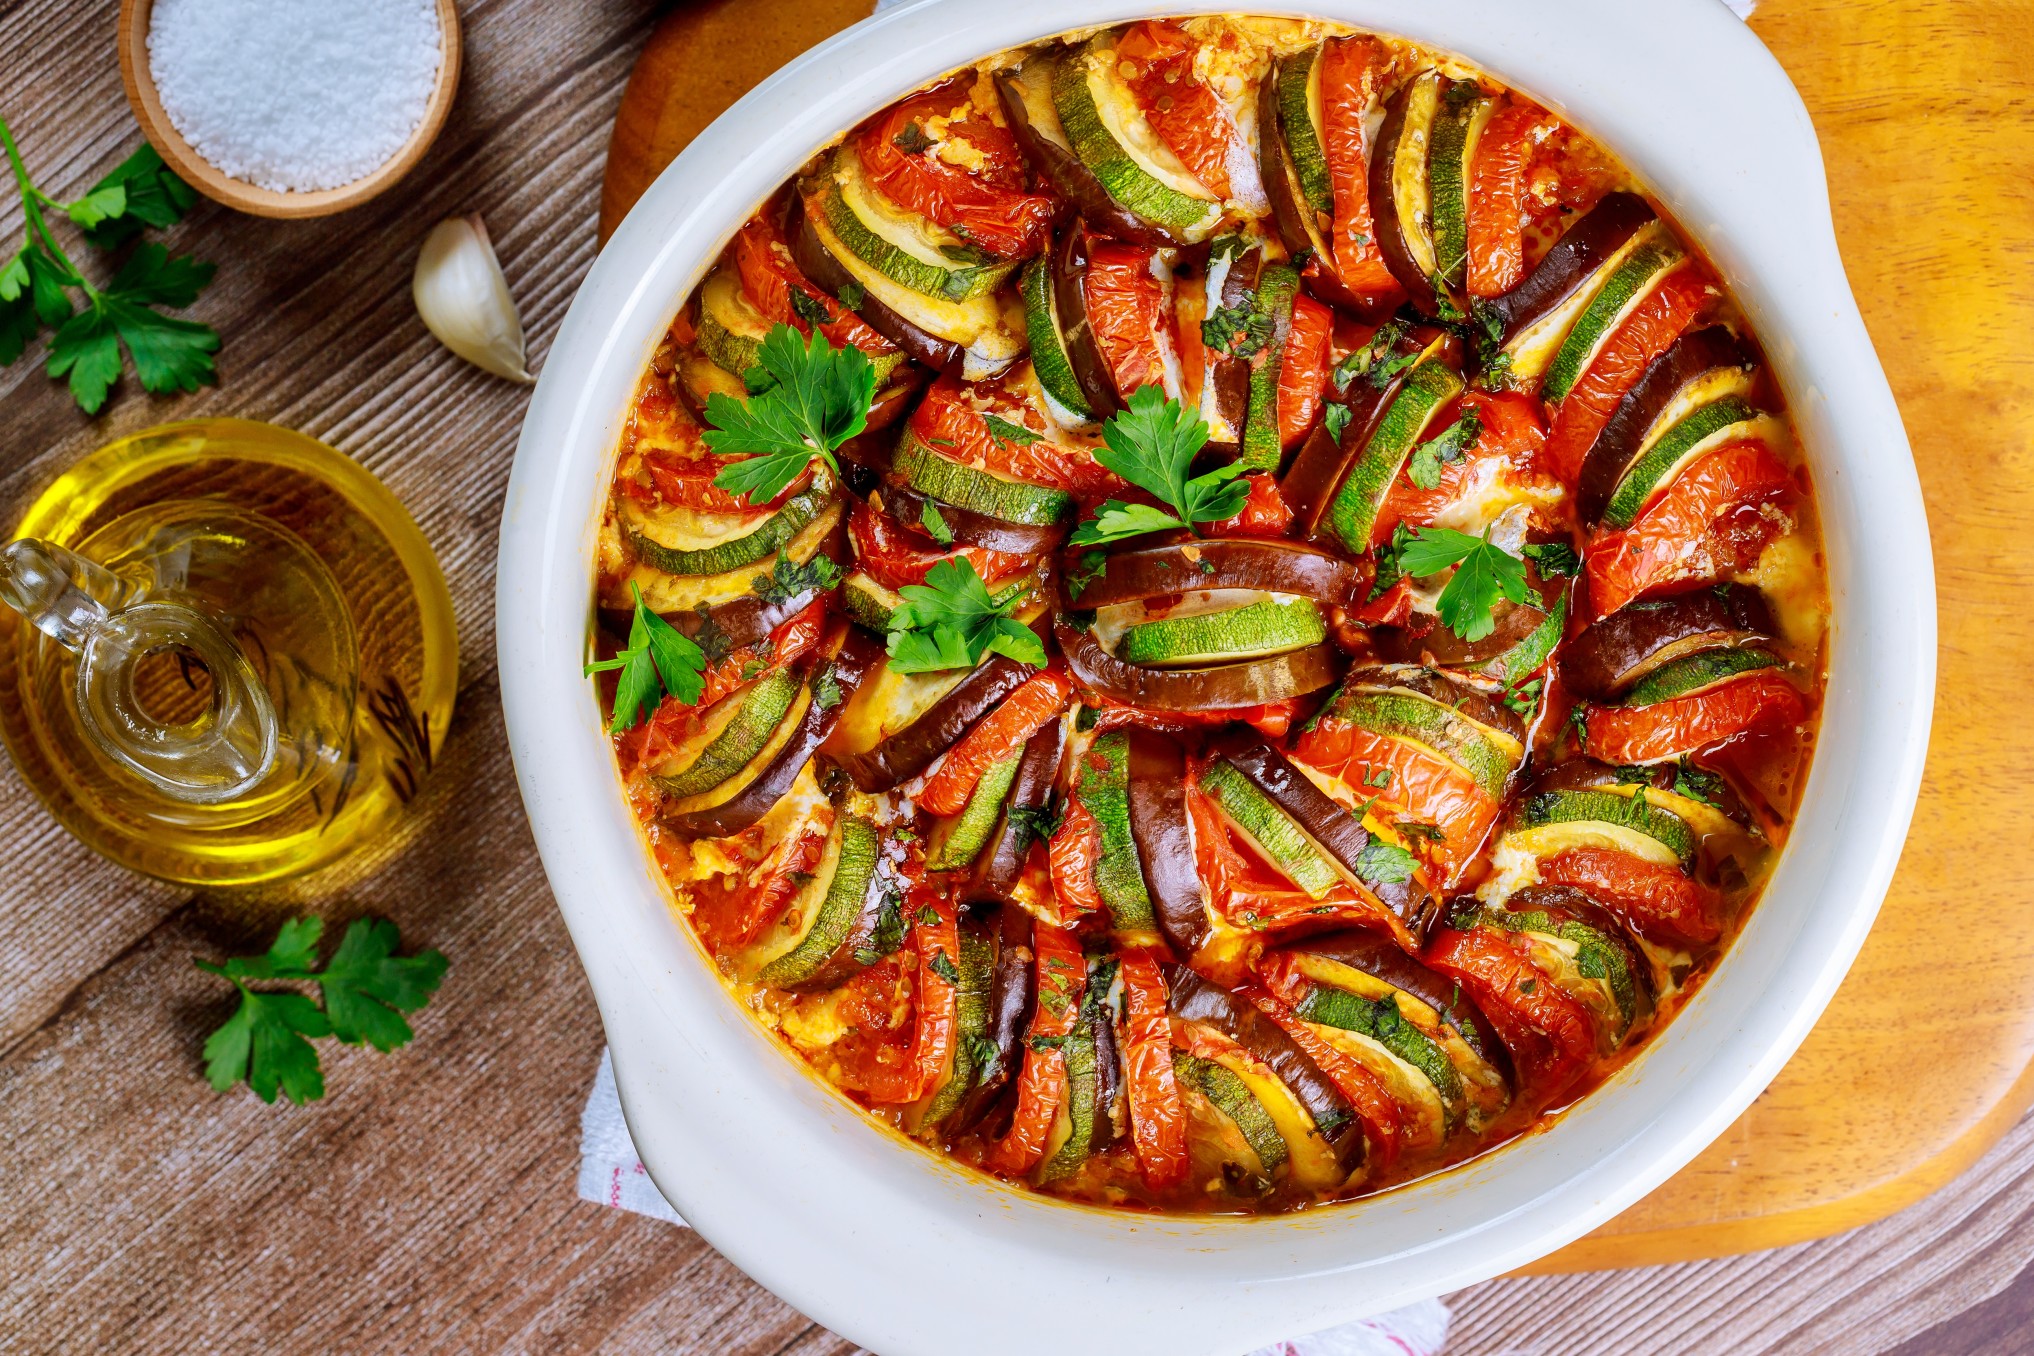 What To Serve With Ratatouille: Sides & Compliments